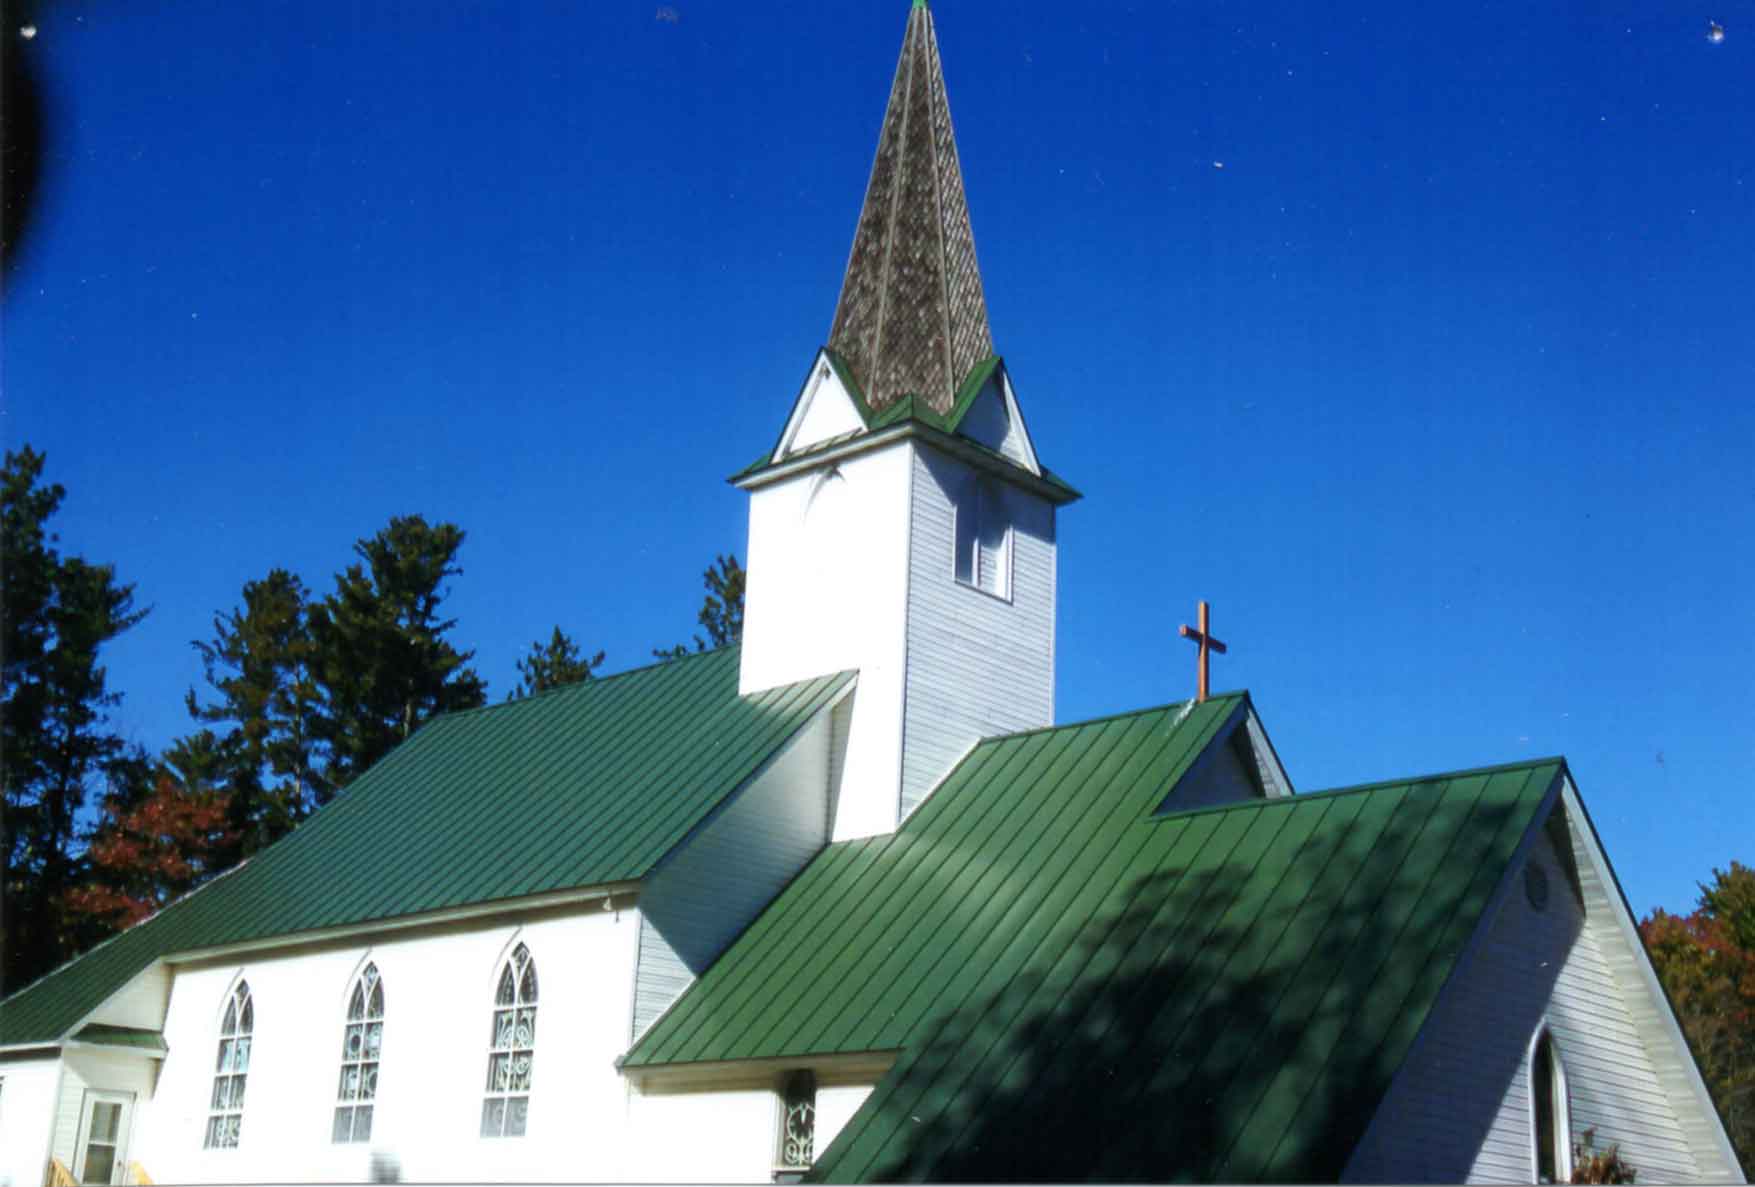 Commercial Metal Roofing on a Church